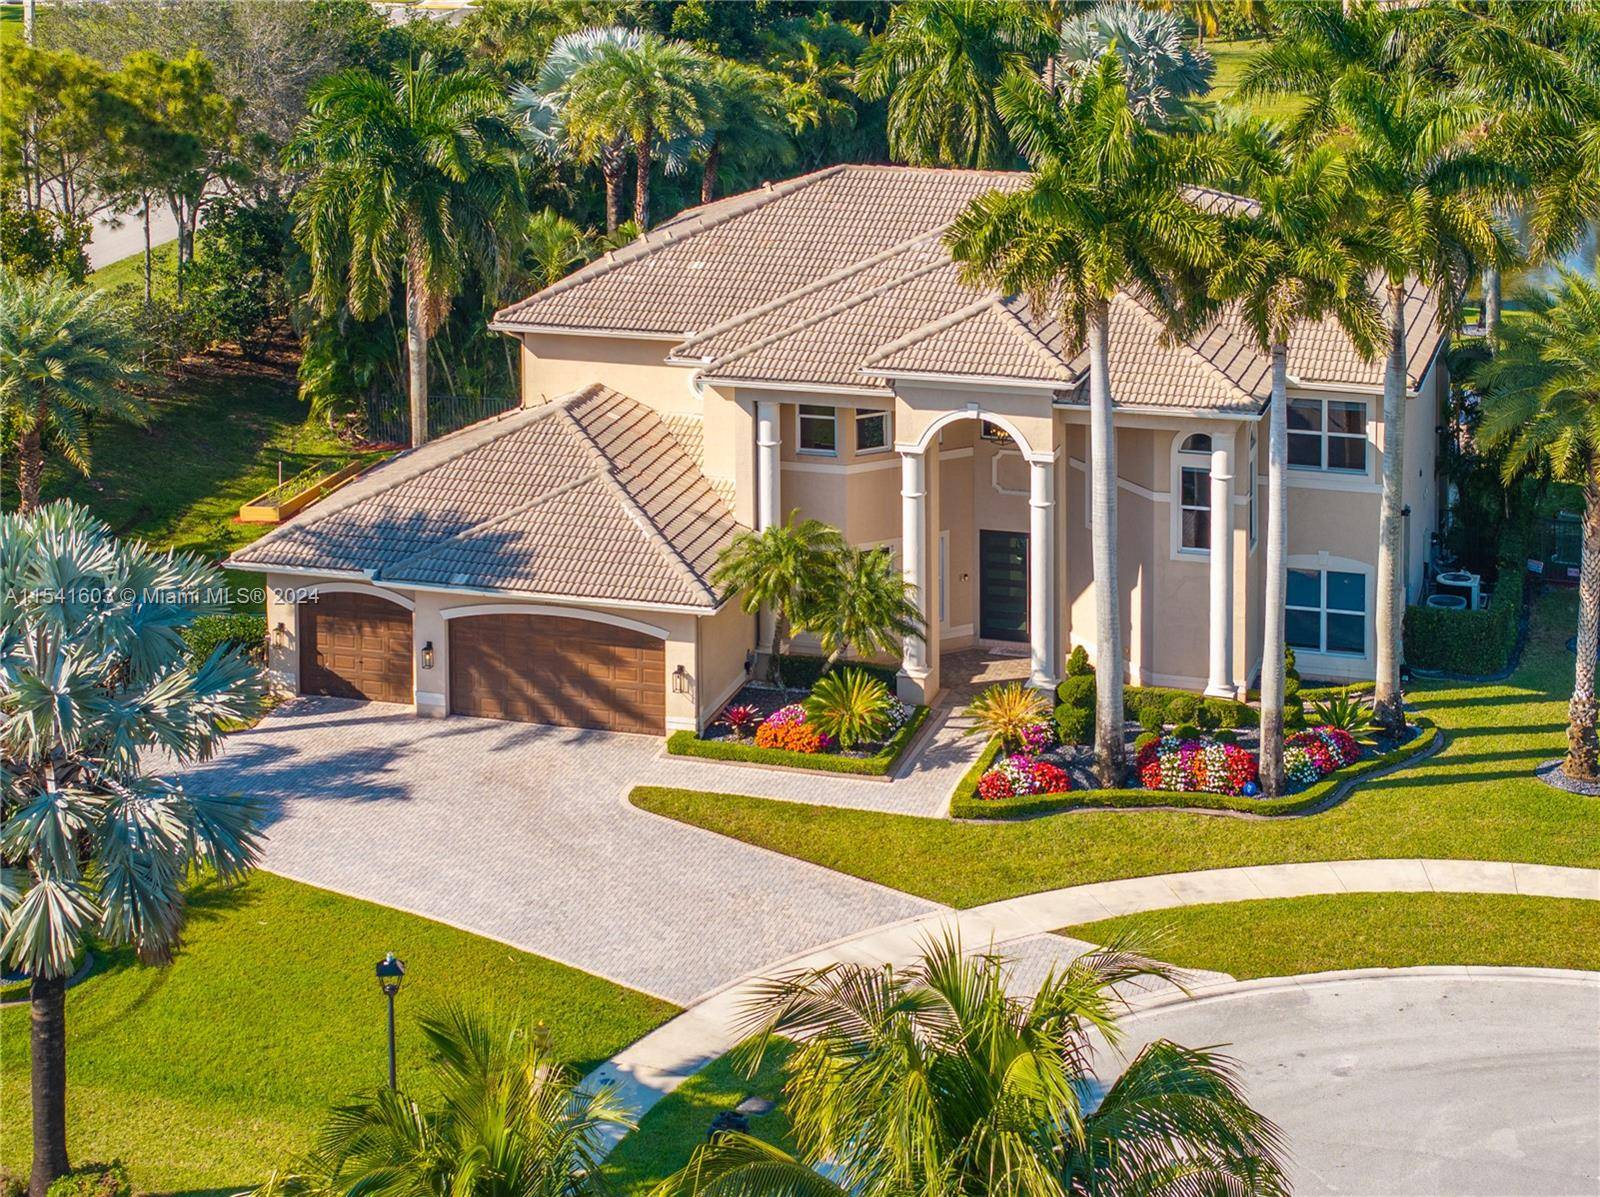 Experience luxury living in this stunning home situated in one of Davie's most exclusive gated communities.